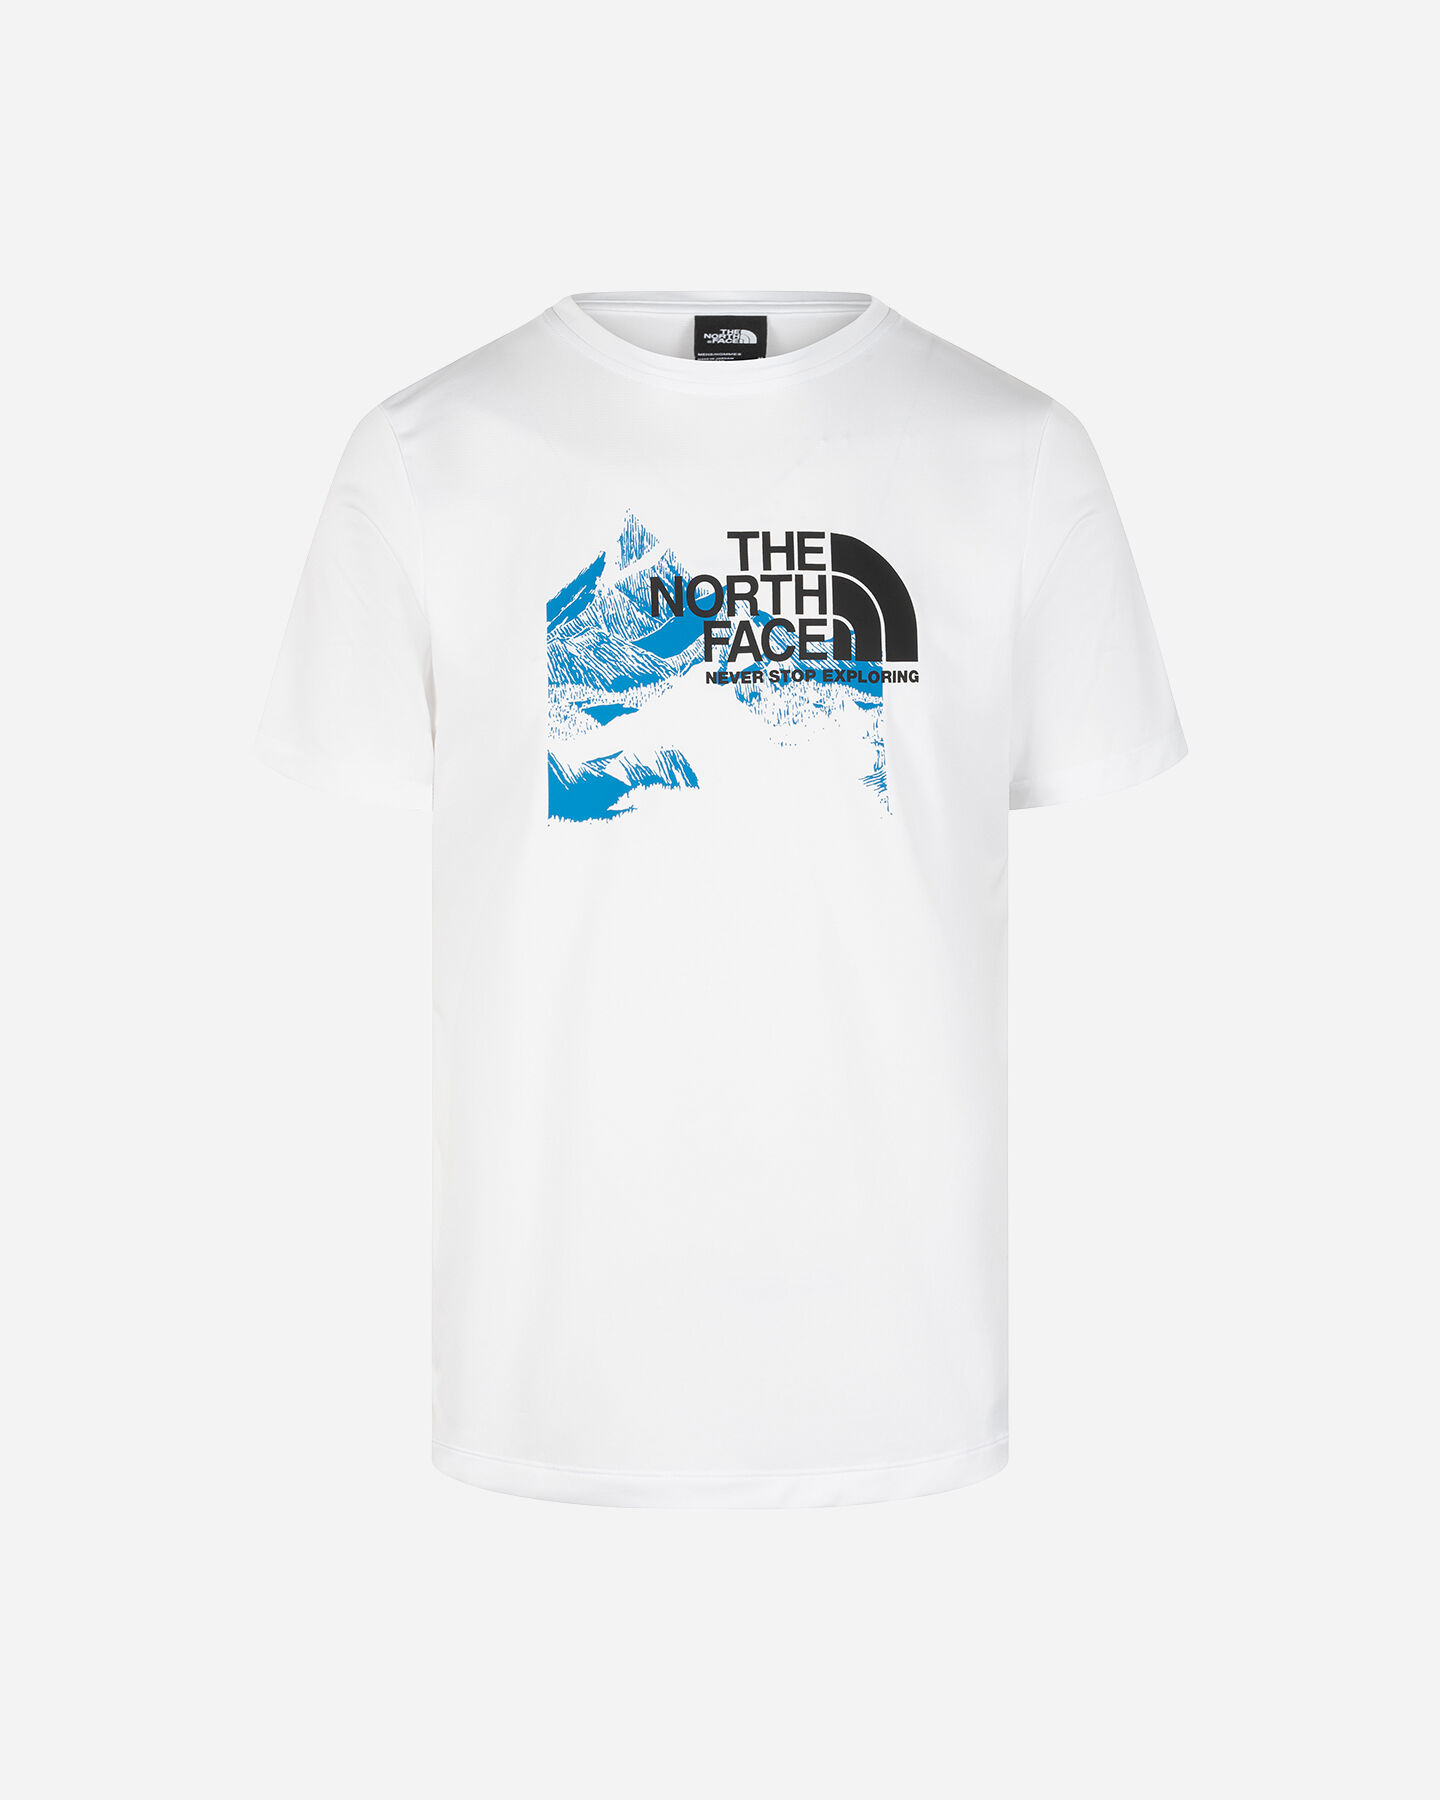  T-Shirt THE NORTH FACE NEW ODLES TECH M S5666499|ZI2|S scatto 0